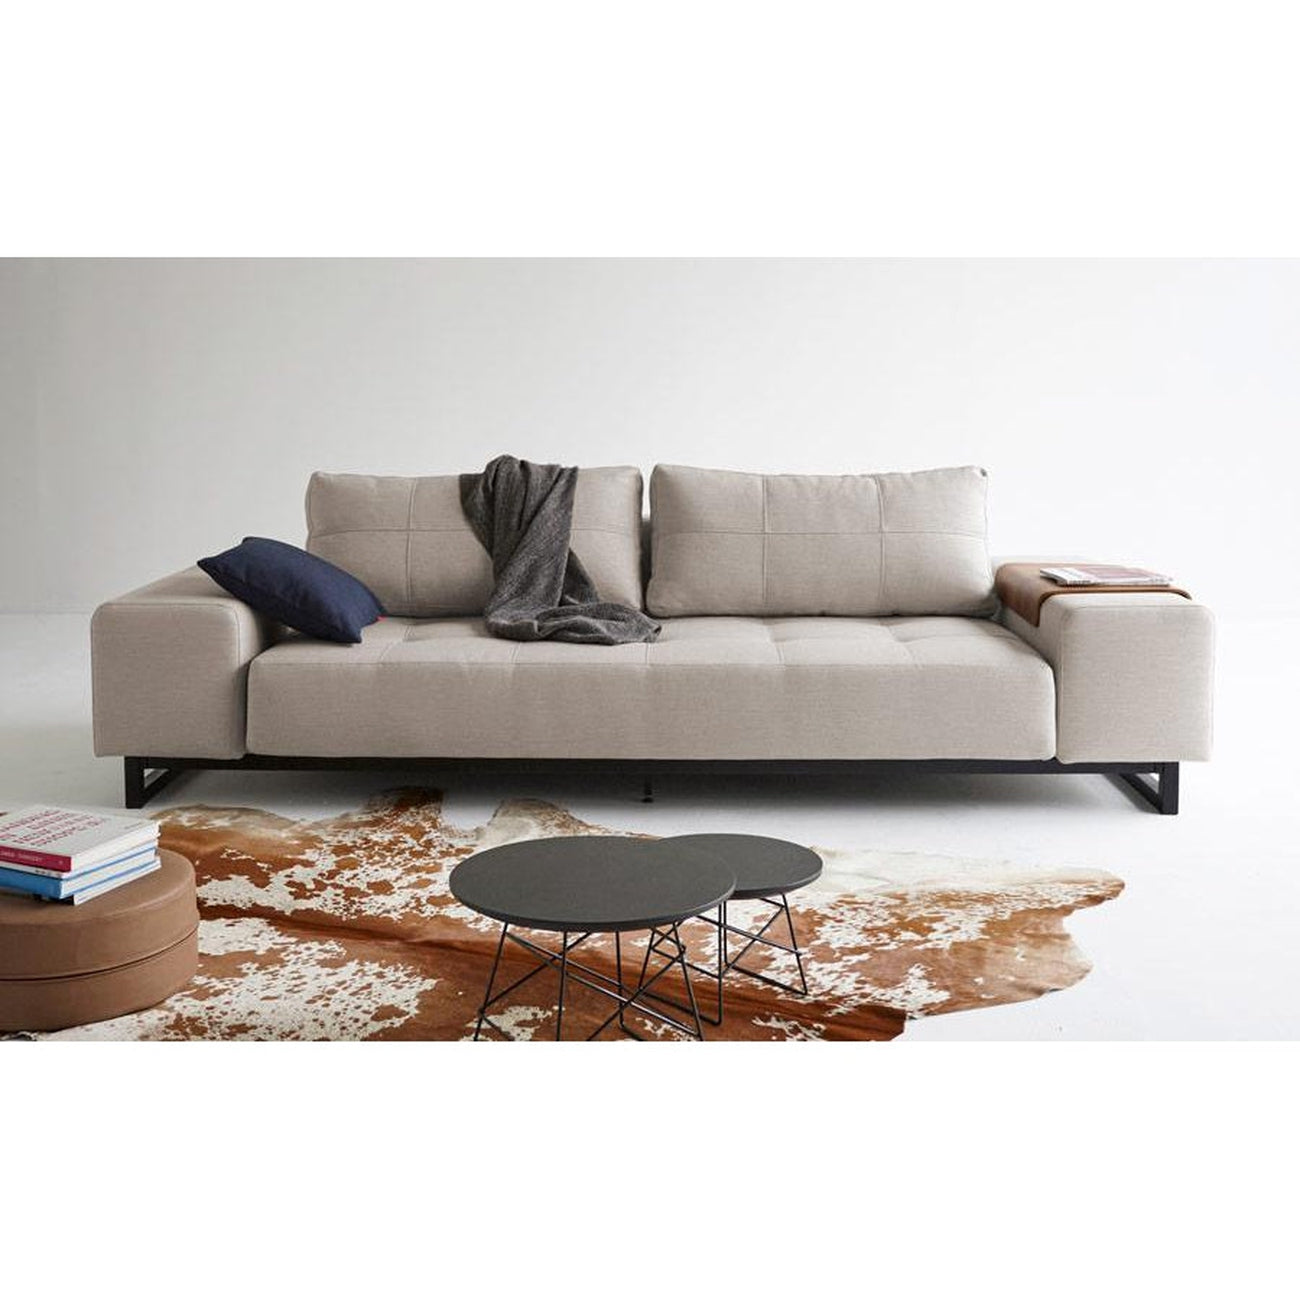 Grand D.E.L sofa BLACK WOOD (QUEEN)-Innovation Living-INNO-94-748190527-3-SofasMixed Dance Natural-10-France and Son